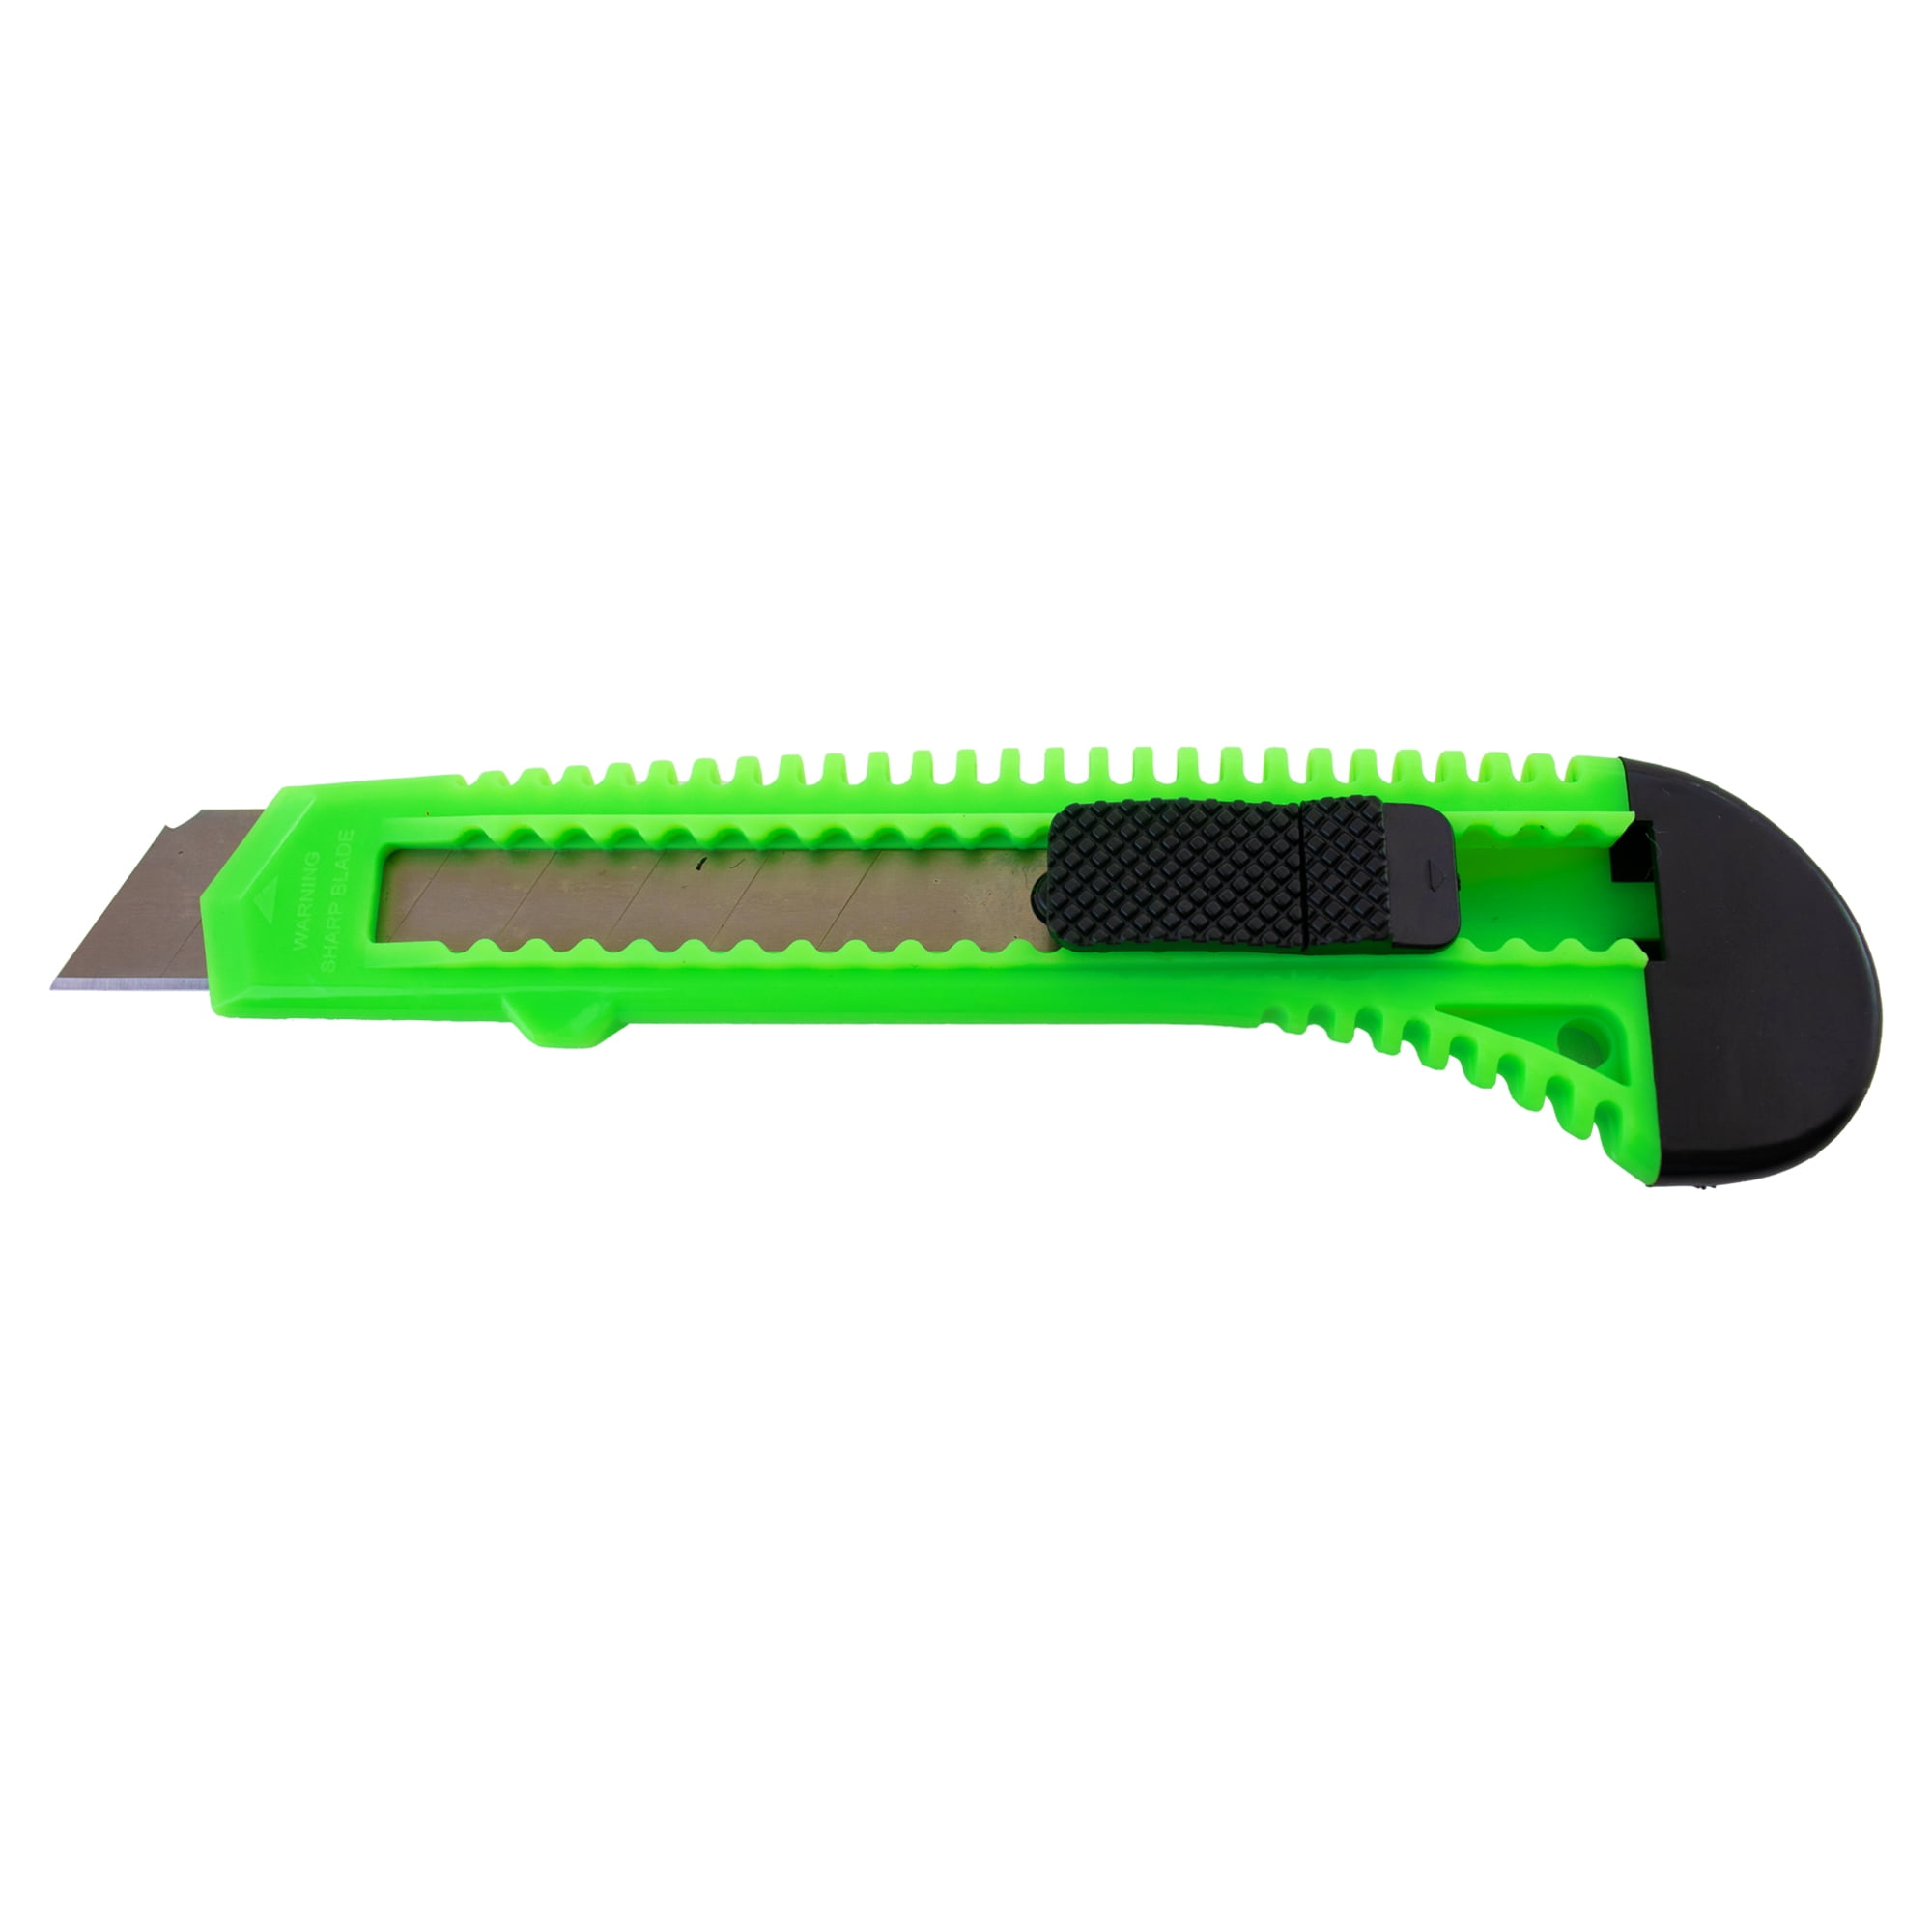 10 Safety Box Cutter Utility Knife Retractable Snap off Razor Blade PINK  GREEN 